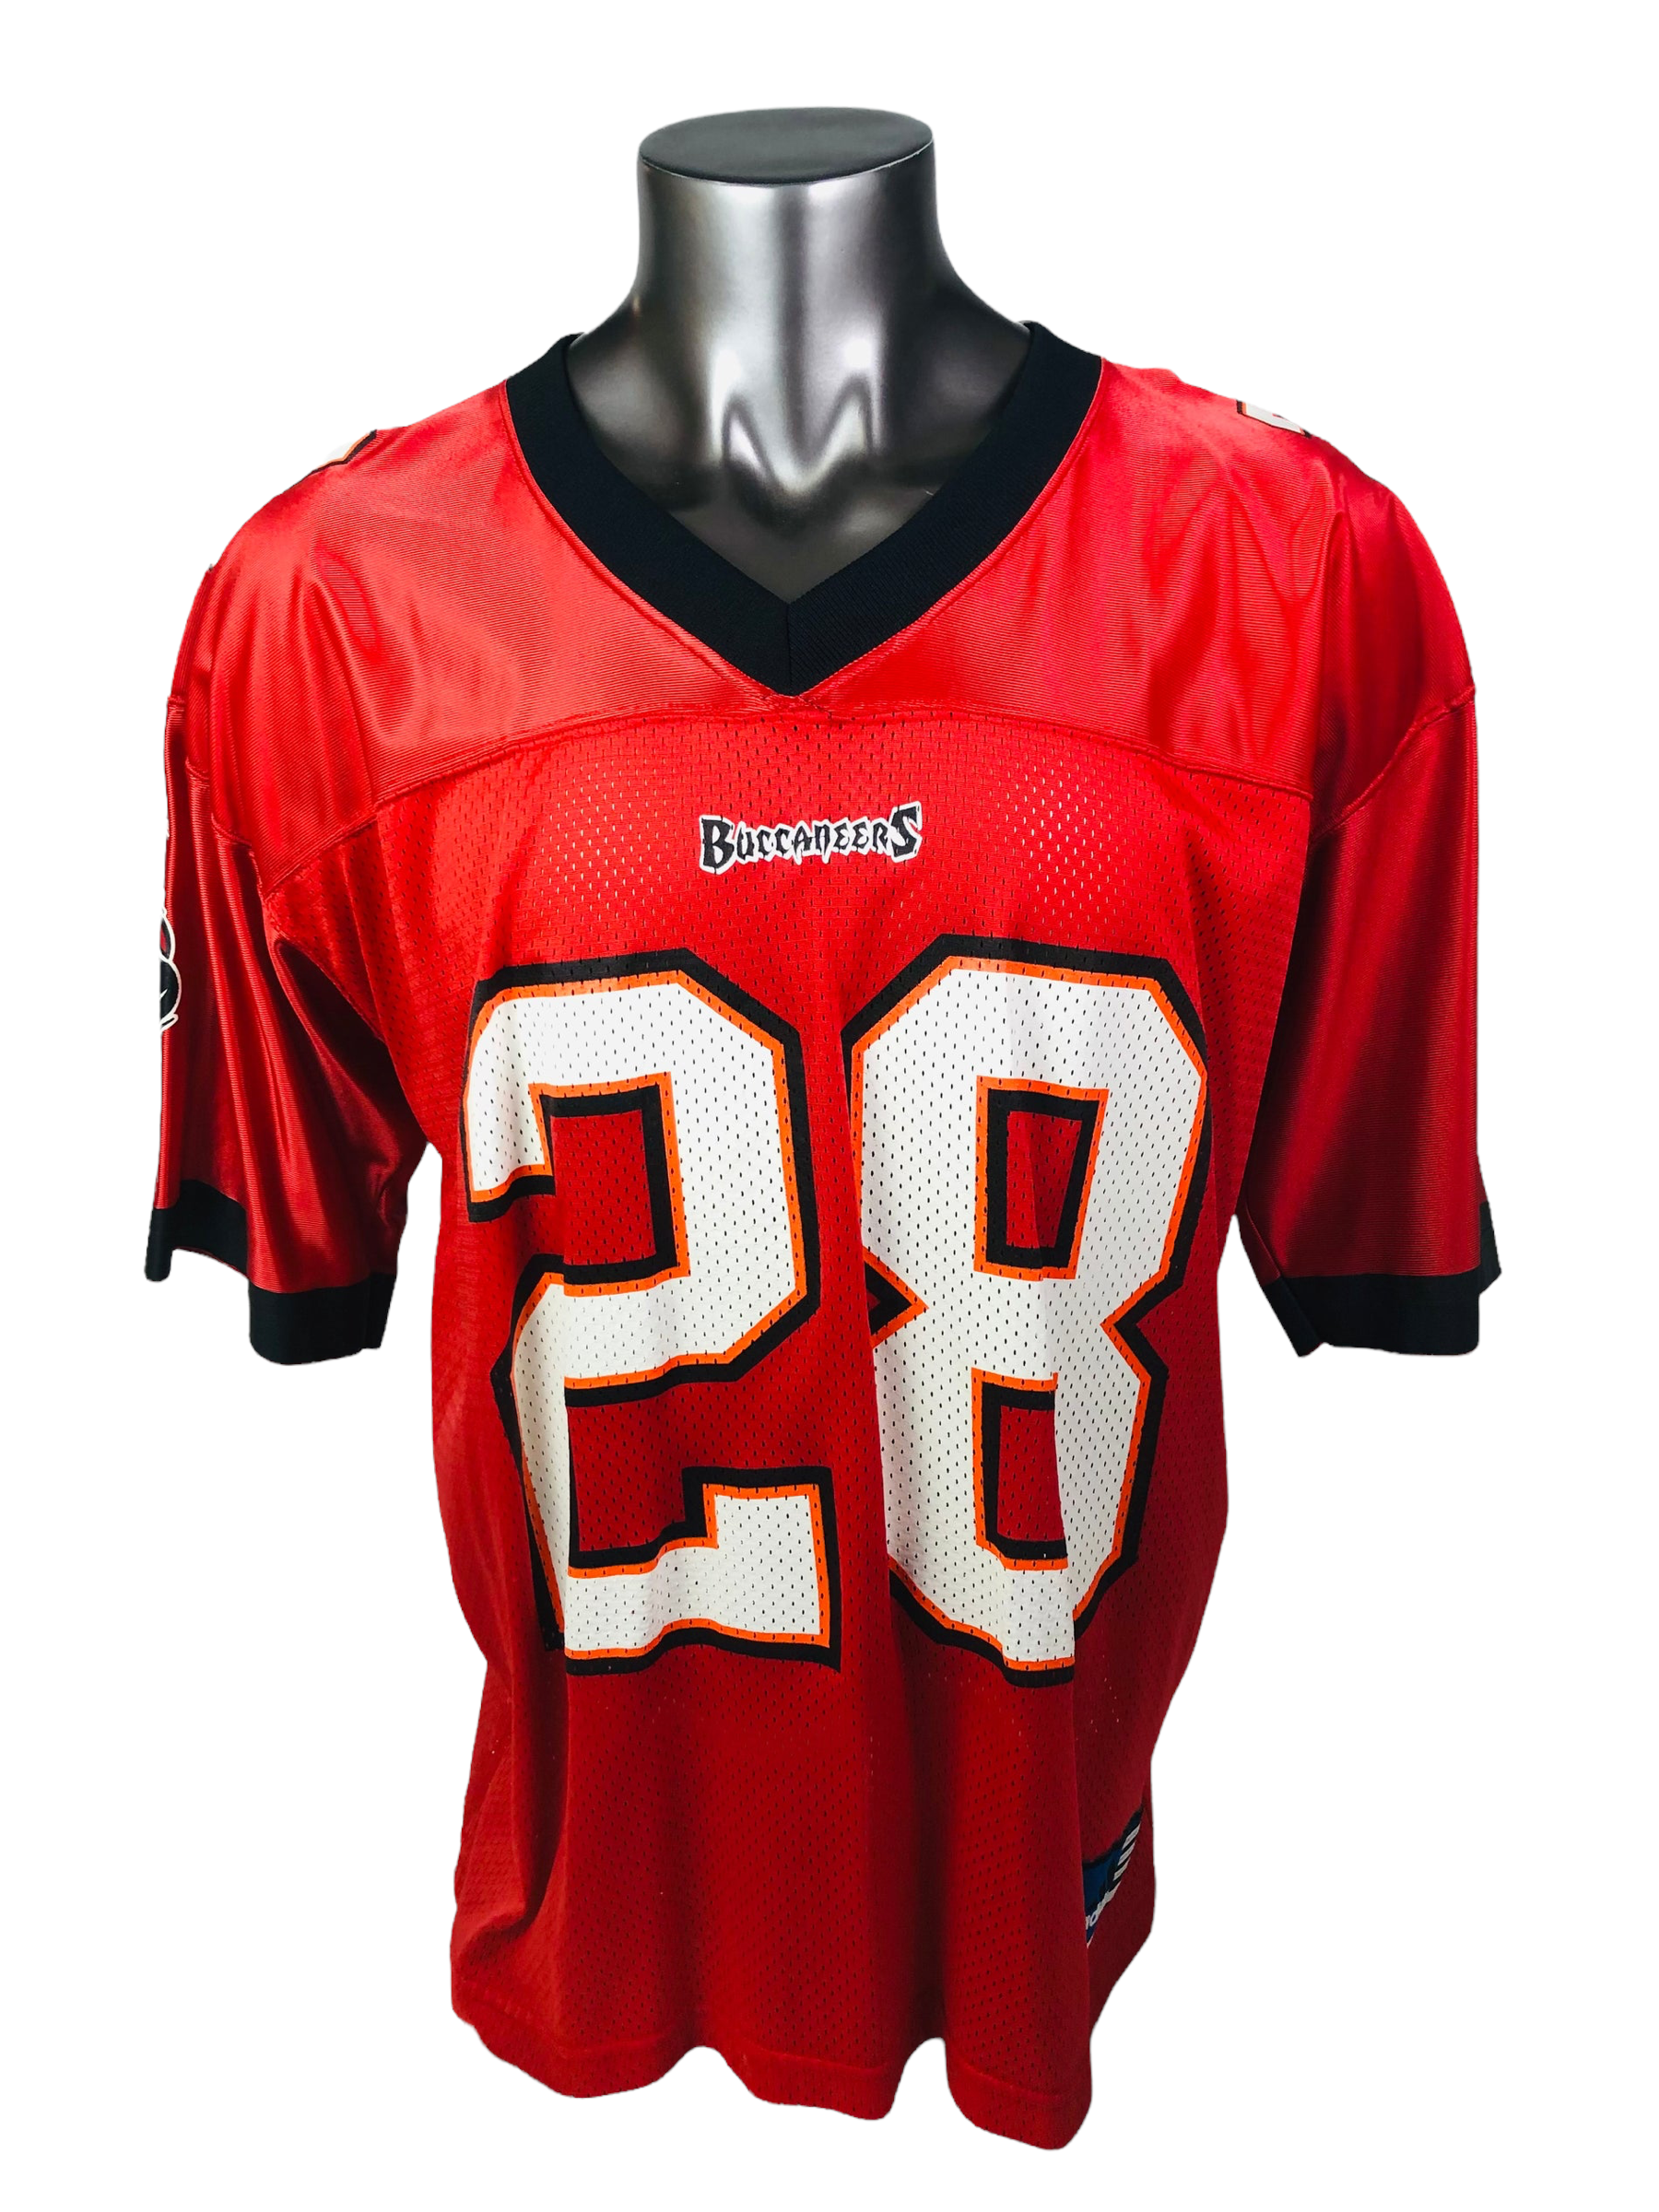 tampa bay buccaneers jersey cheap